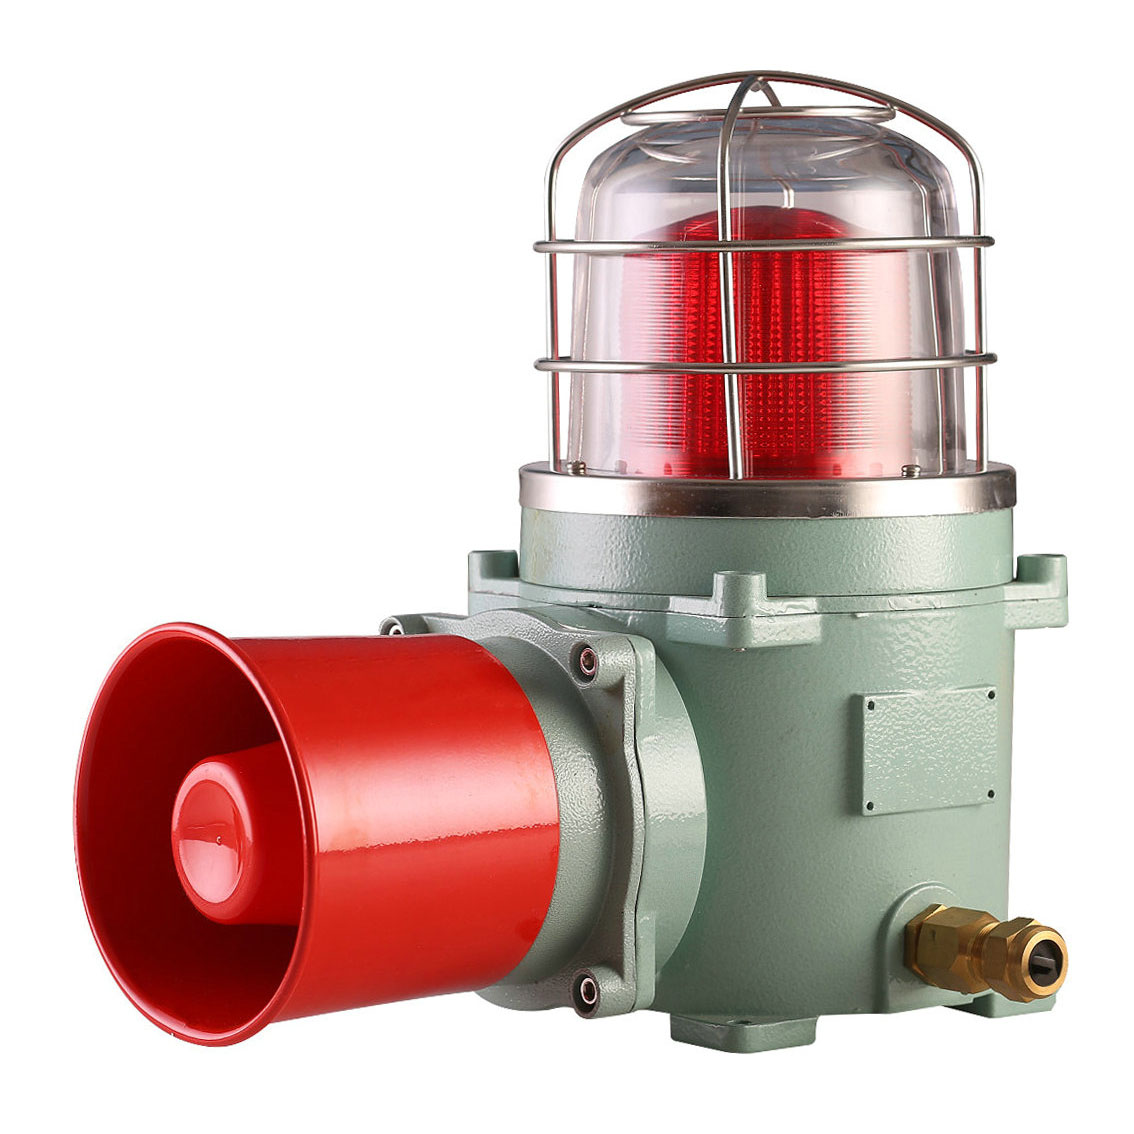 AESL-150 Explosion Proof Alarm Sounder With Warning Beacon